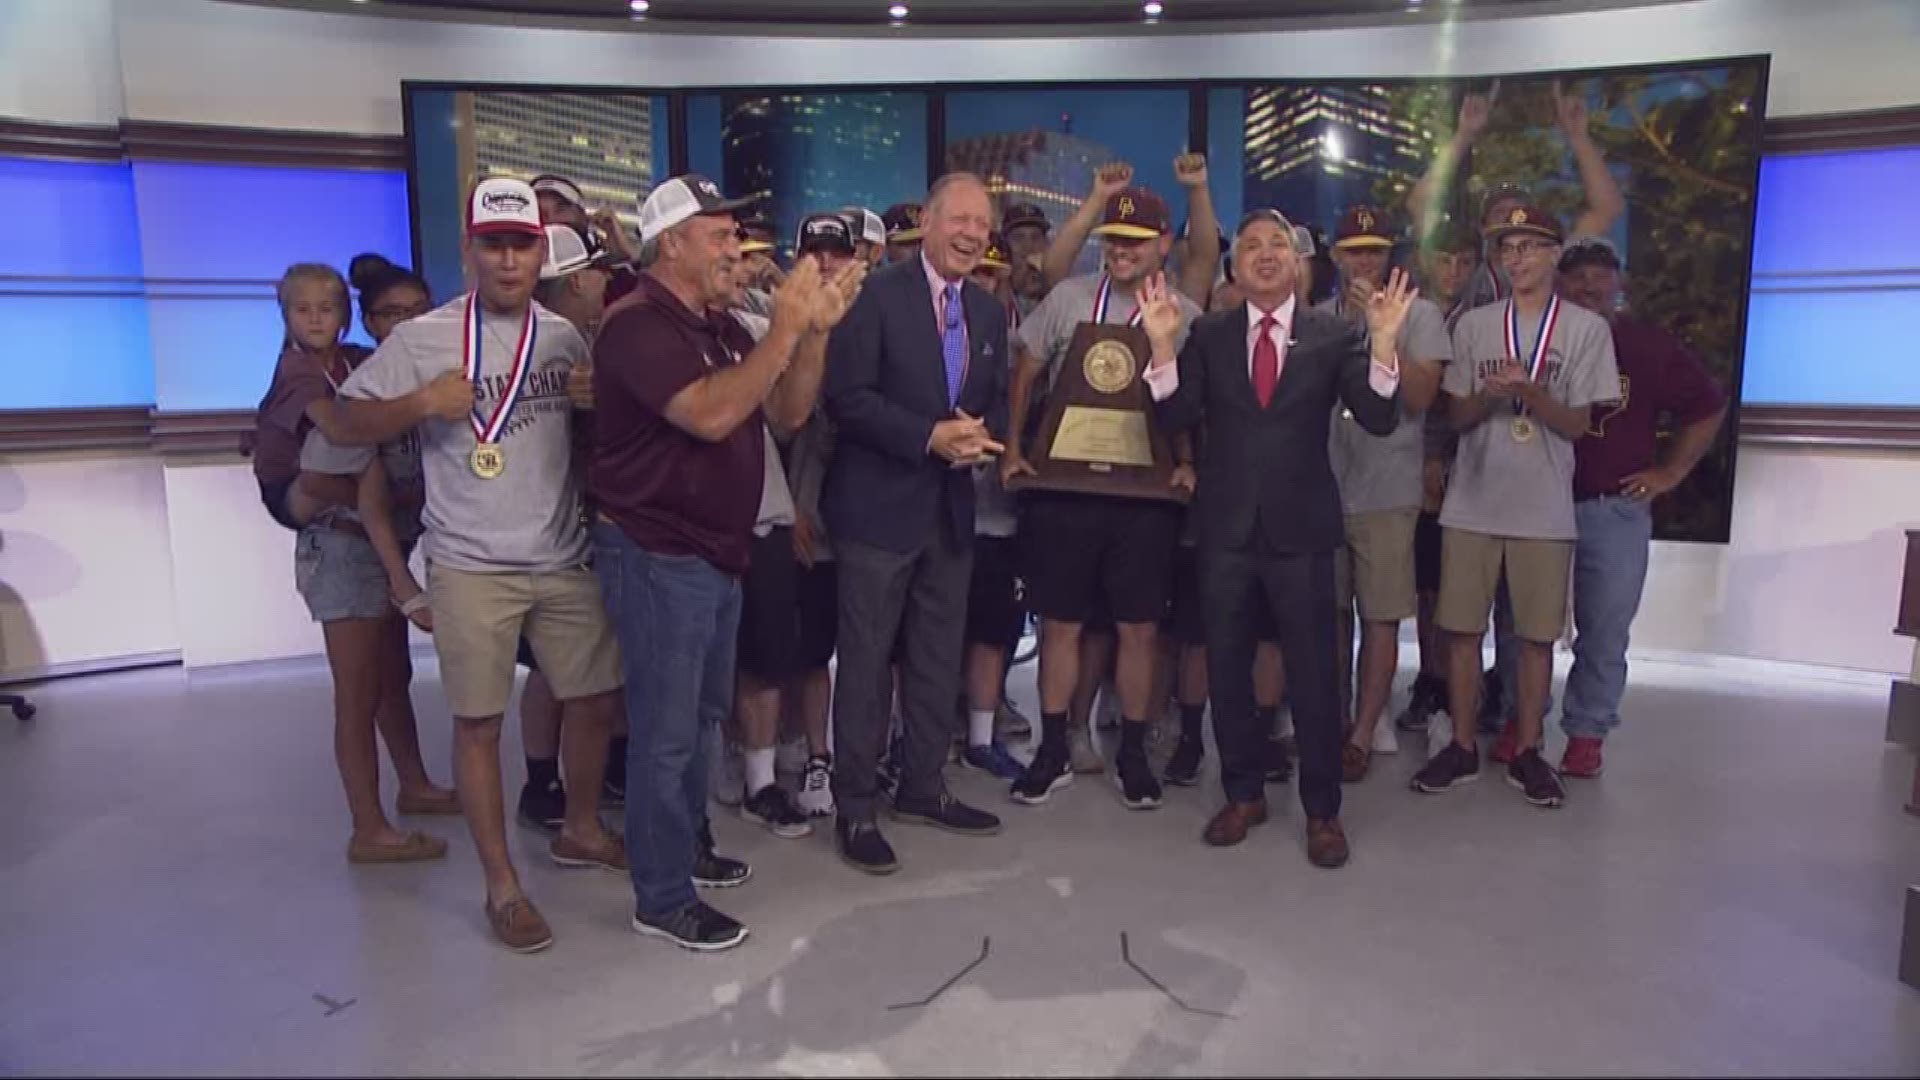 The state baseball champions Deer Park High School were in the studio with Matt Musil and Ron Trevino Sunday night to celebrate their title.